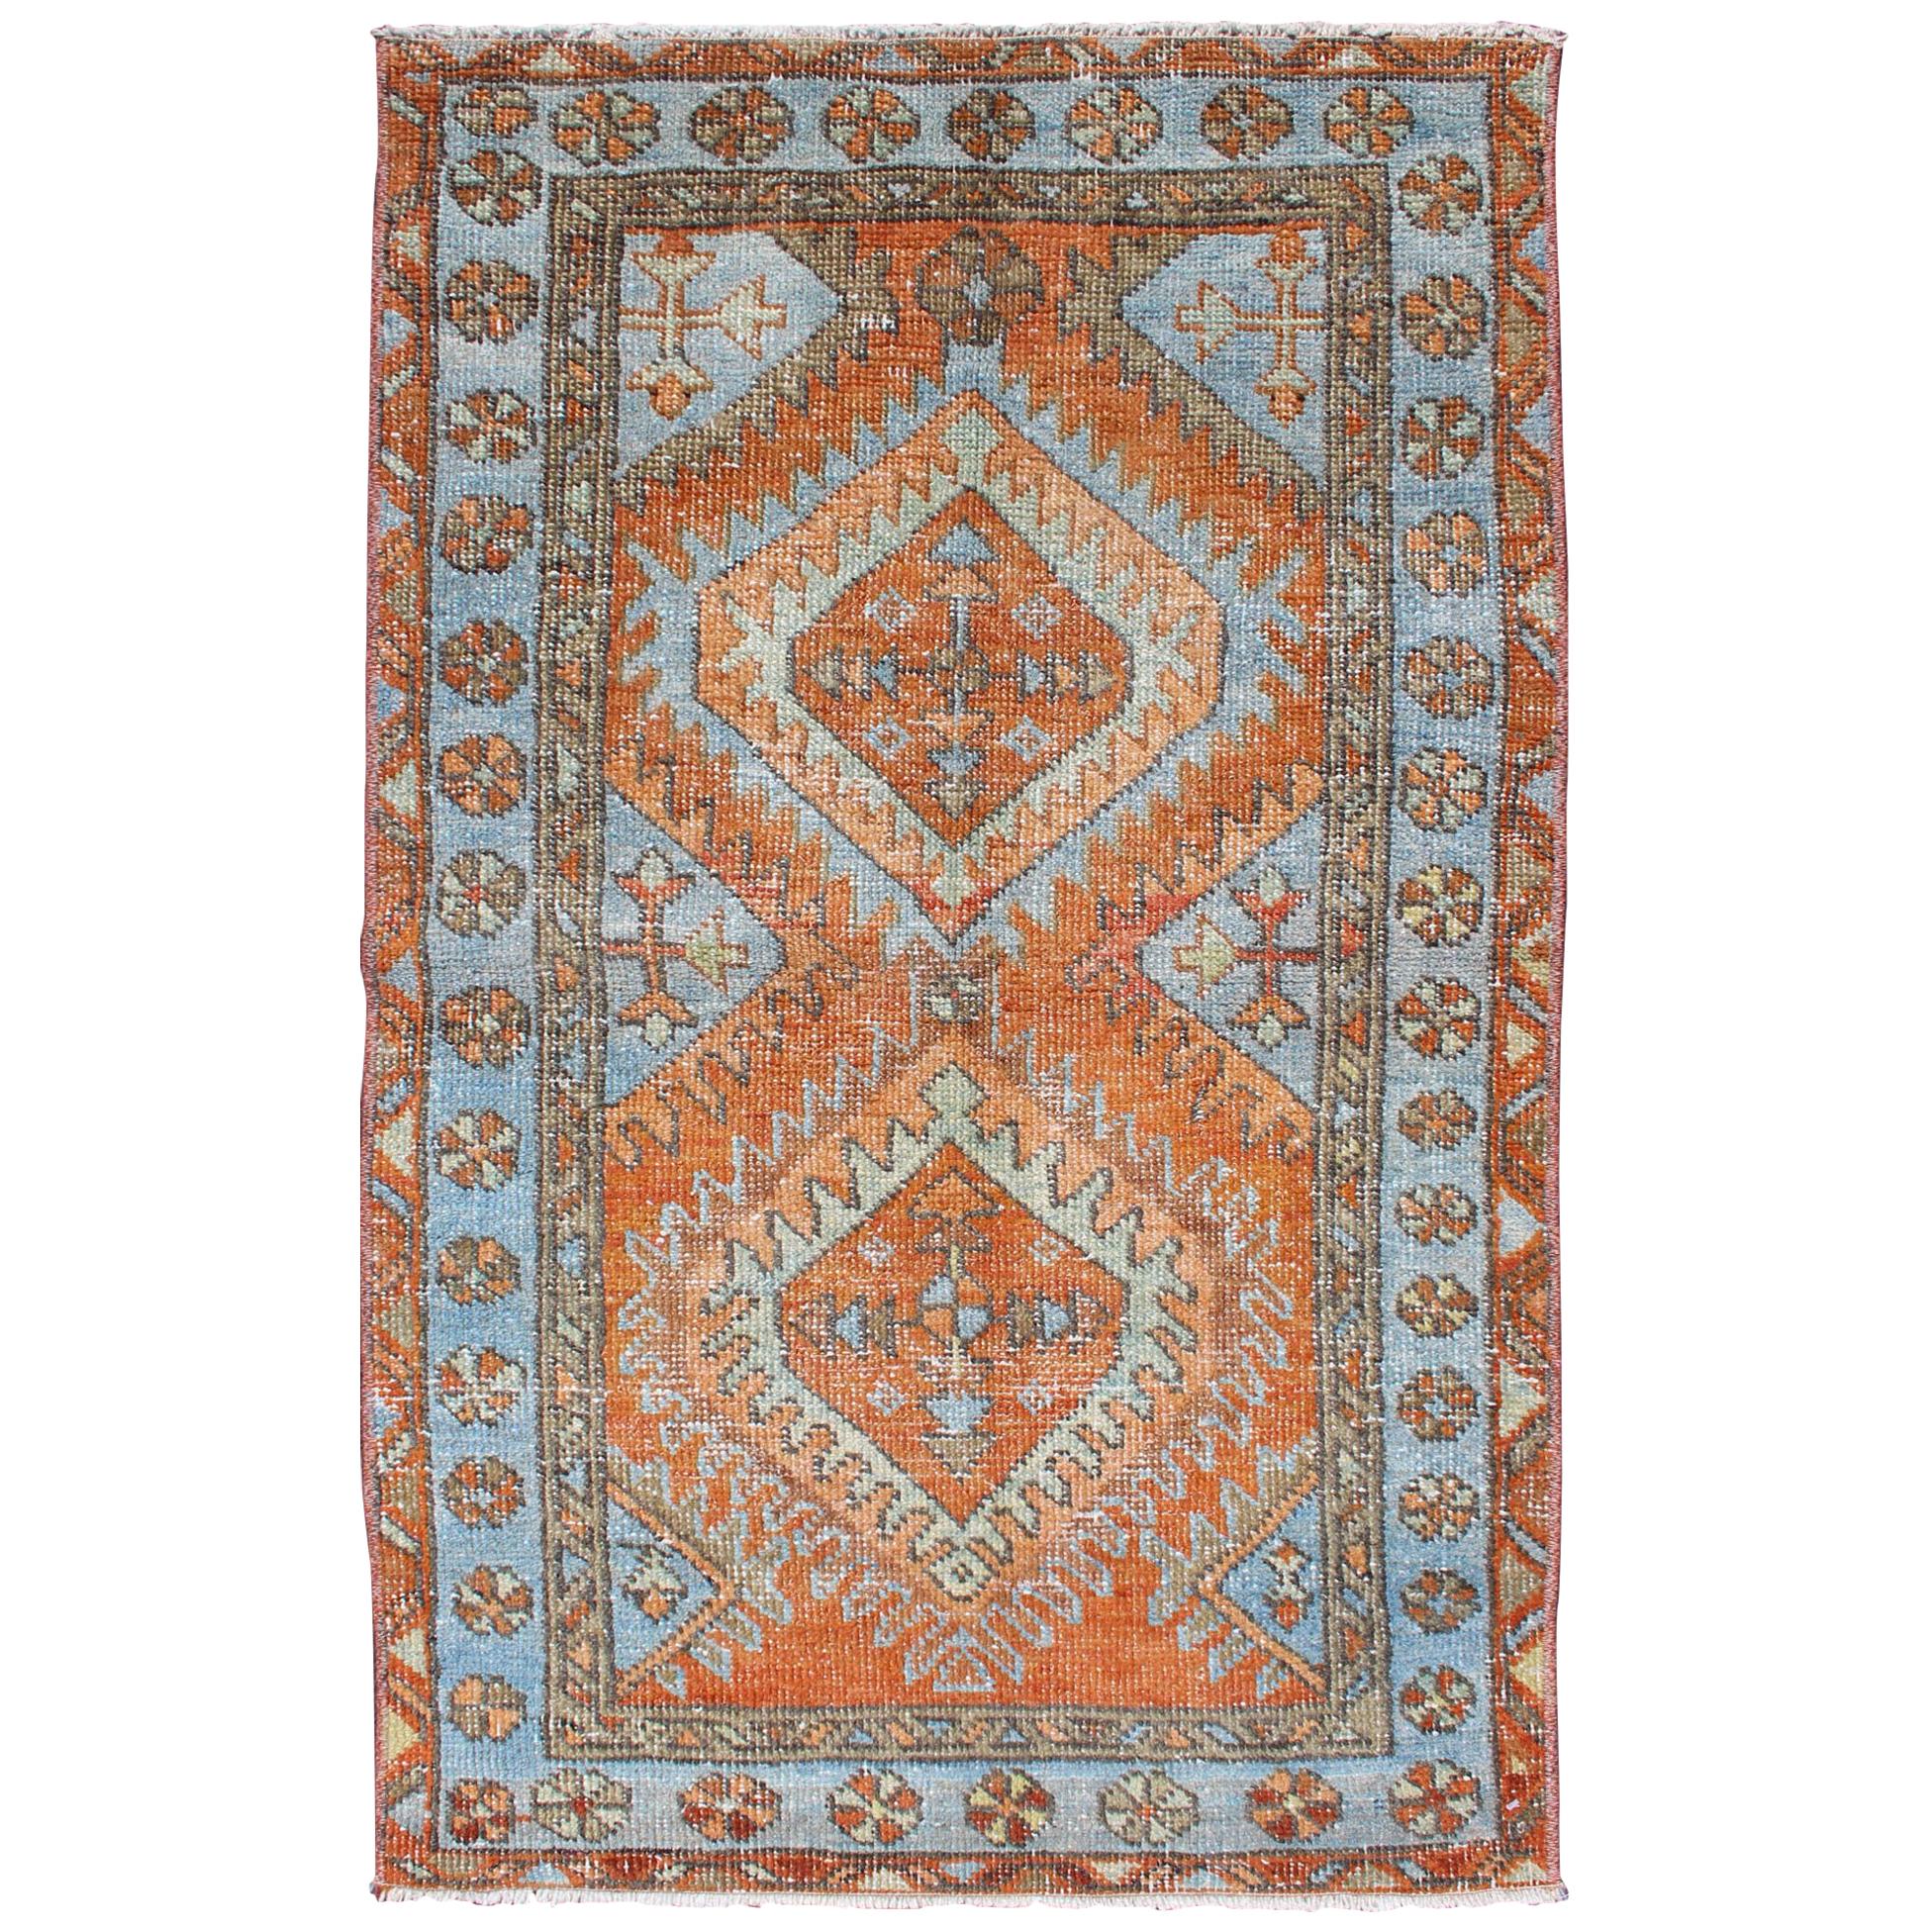 Antique Persian Serapi Small Rug with Dual Medallion Design in Orange and Blue